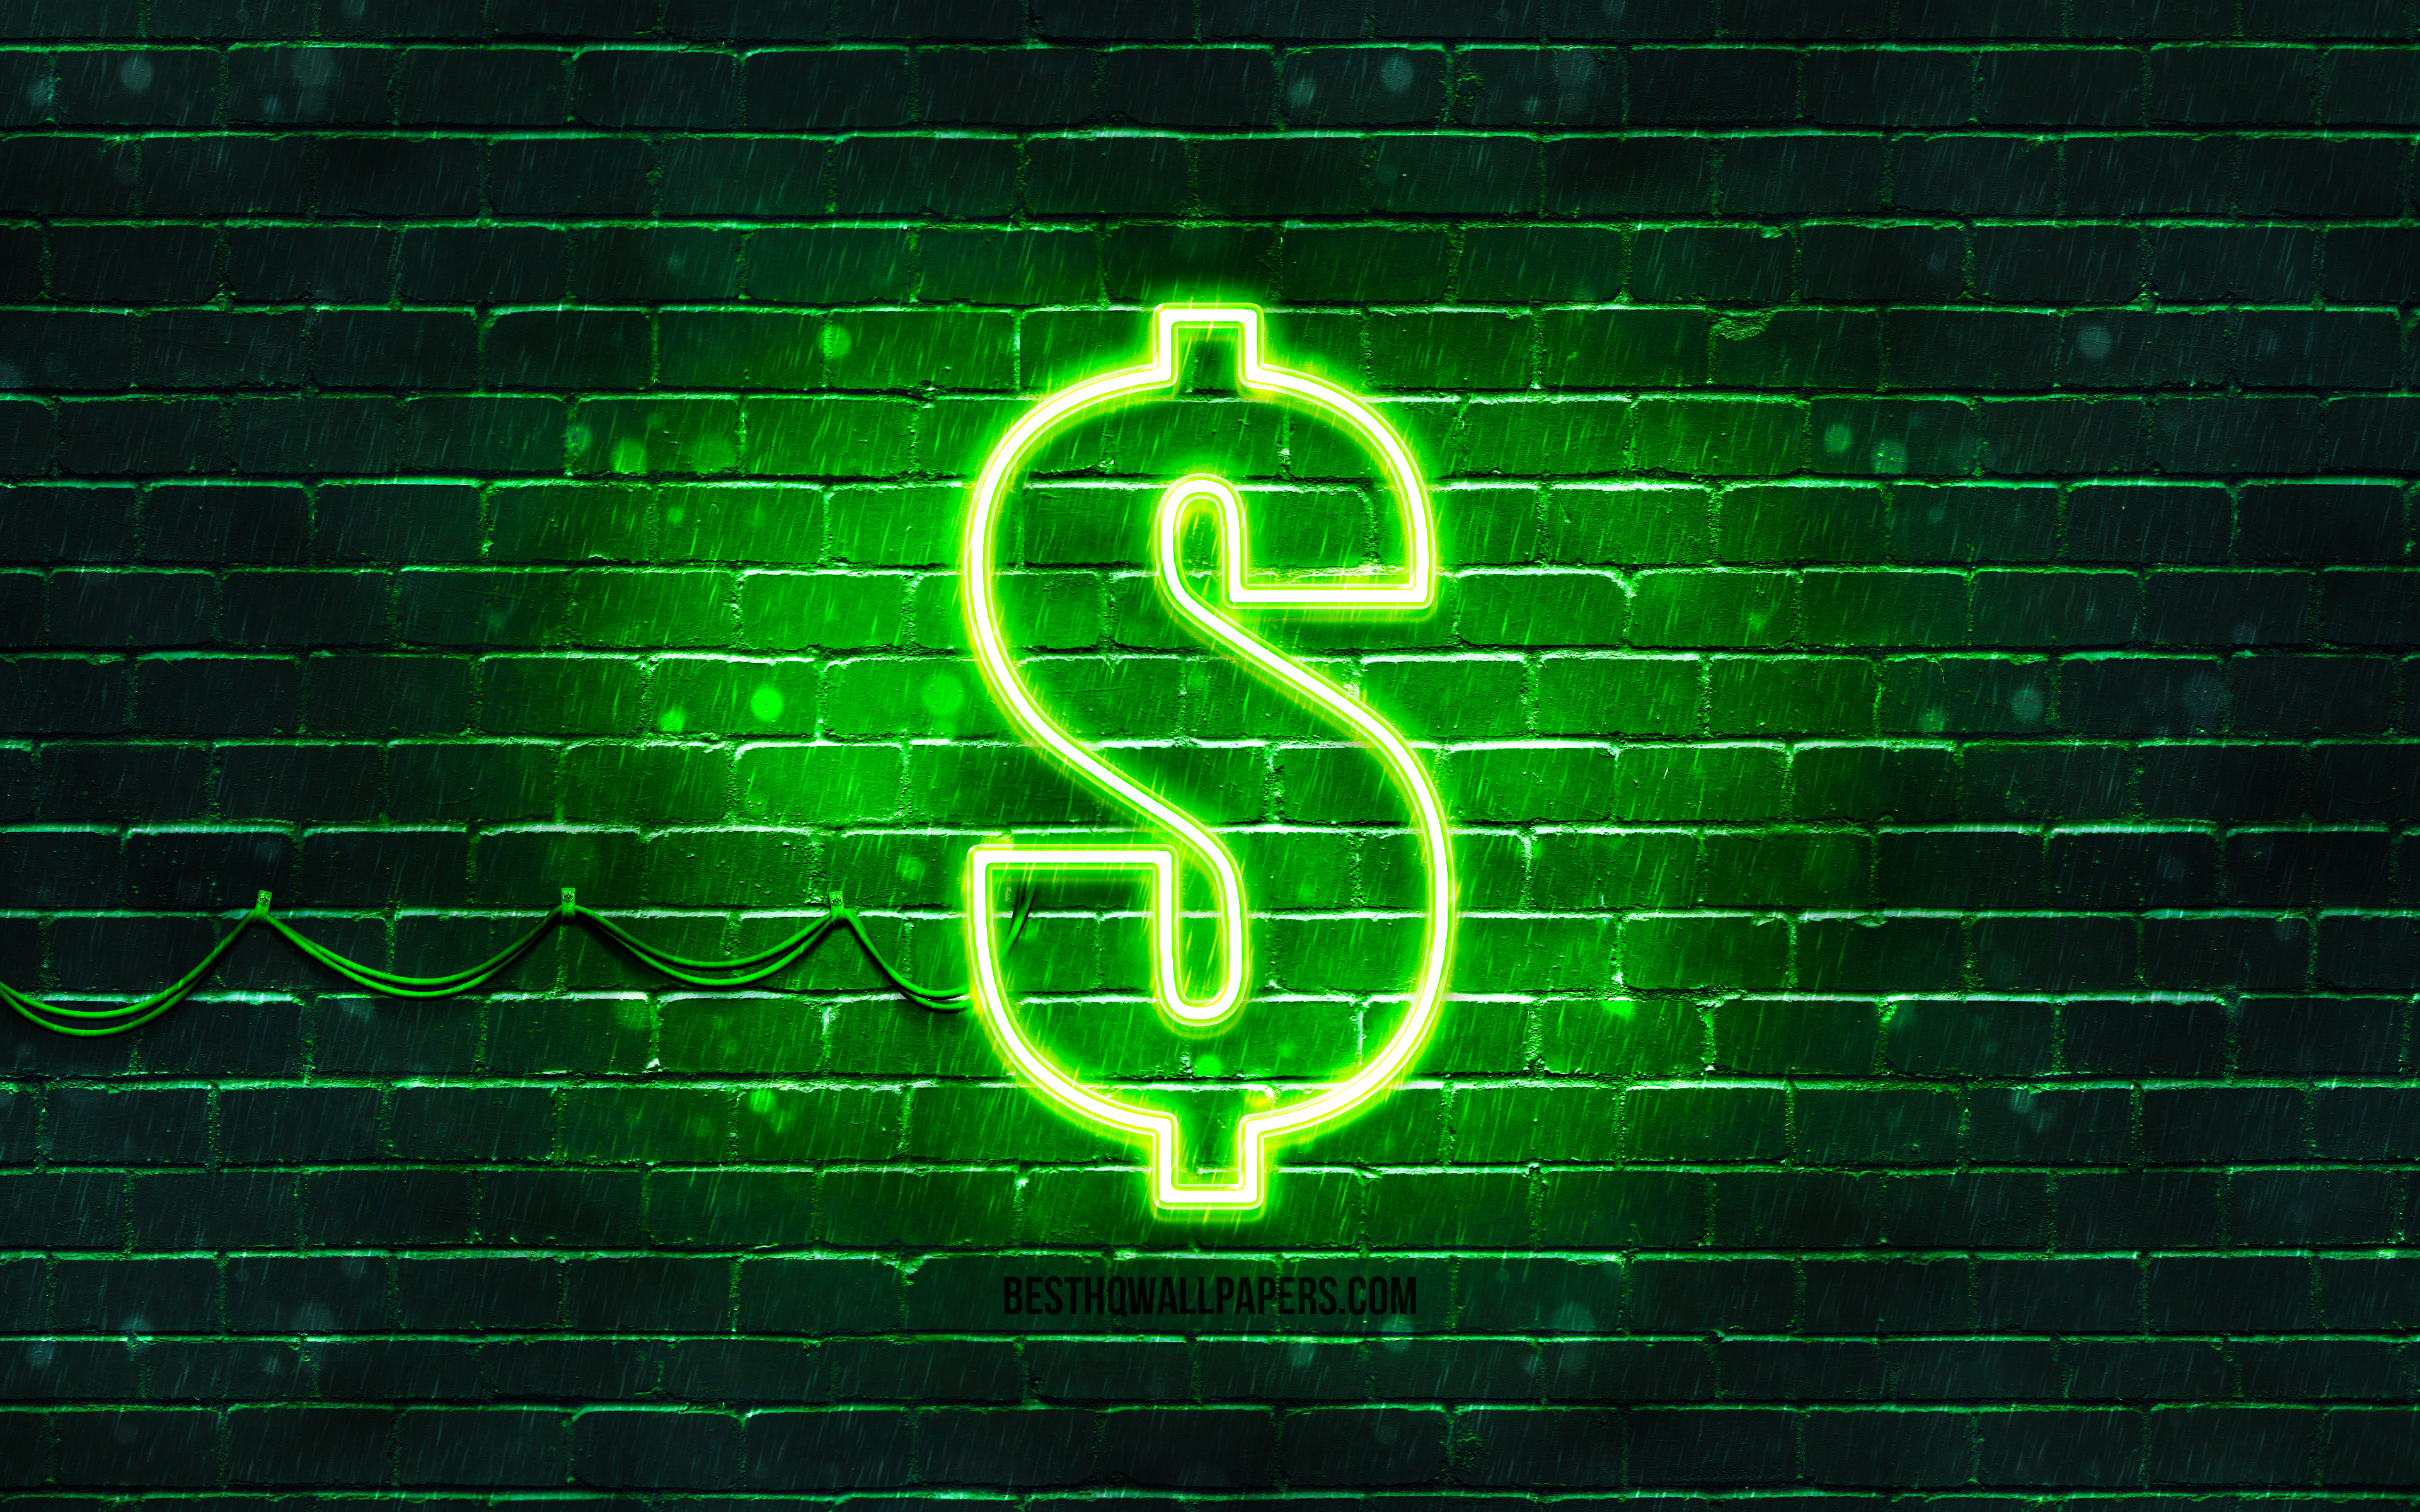 Download wallpaper Dollar green sign, 4k, green brickwall, Dollar sign, currency signs, Dollar neon sign, Dollar for desktop with resolution 3840x2400. High Quality HD picture wallpaper